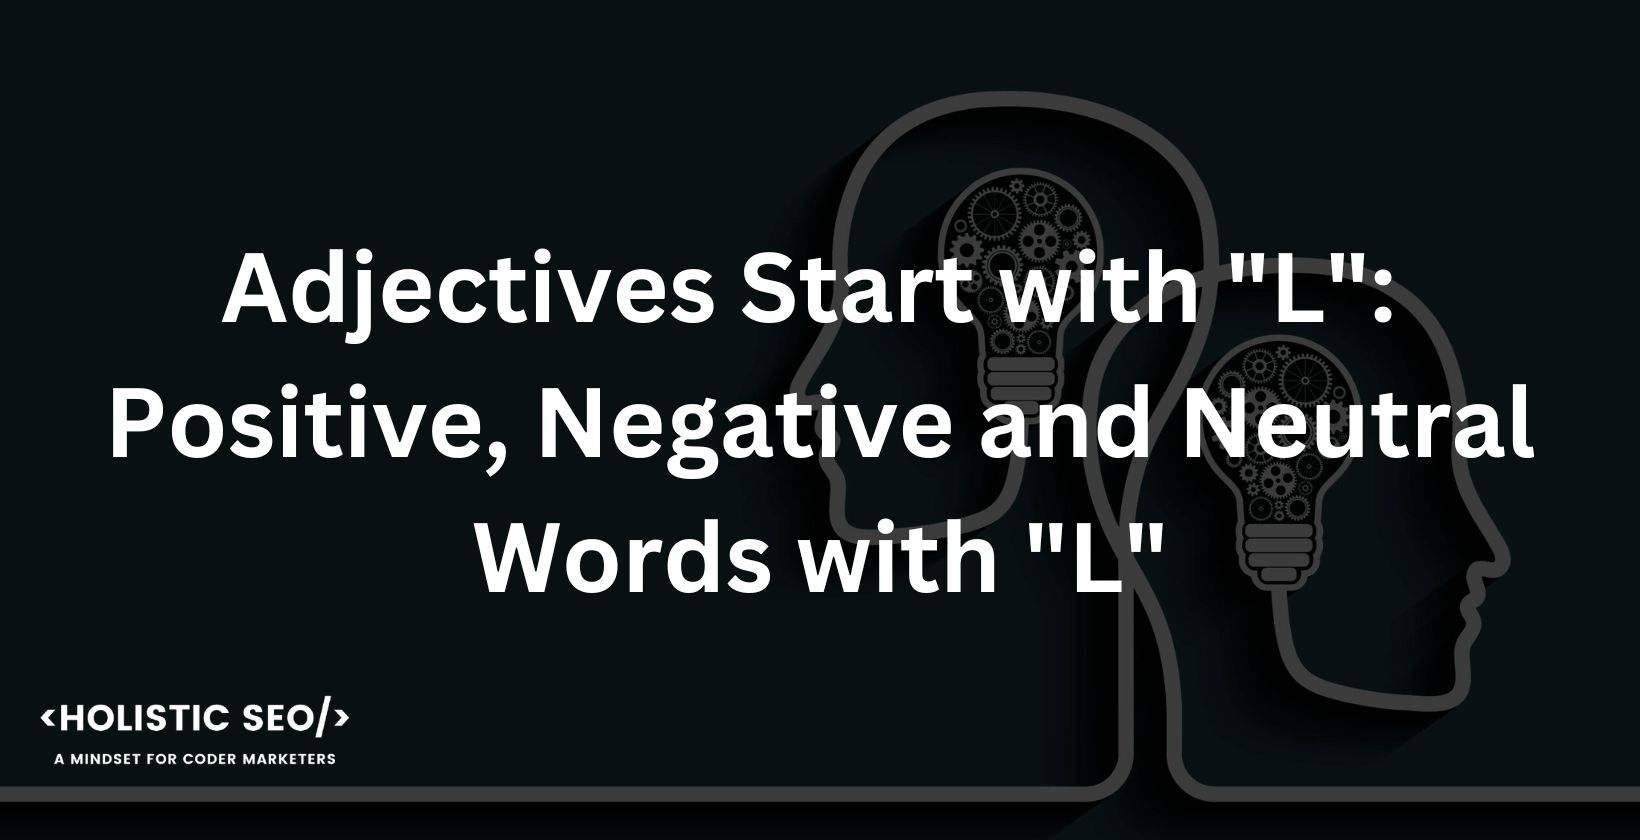 Adjectives That Start with L